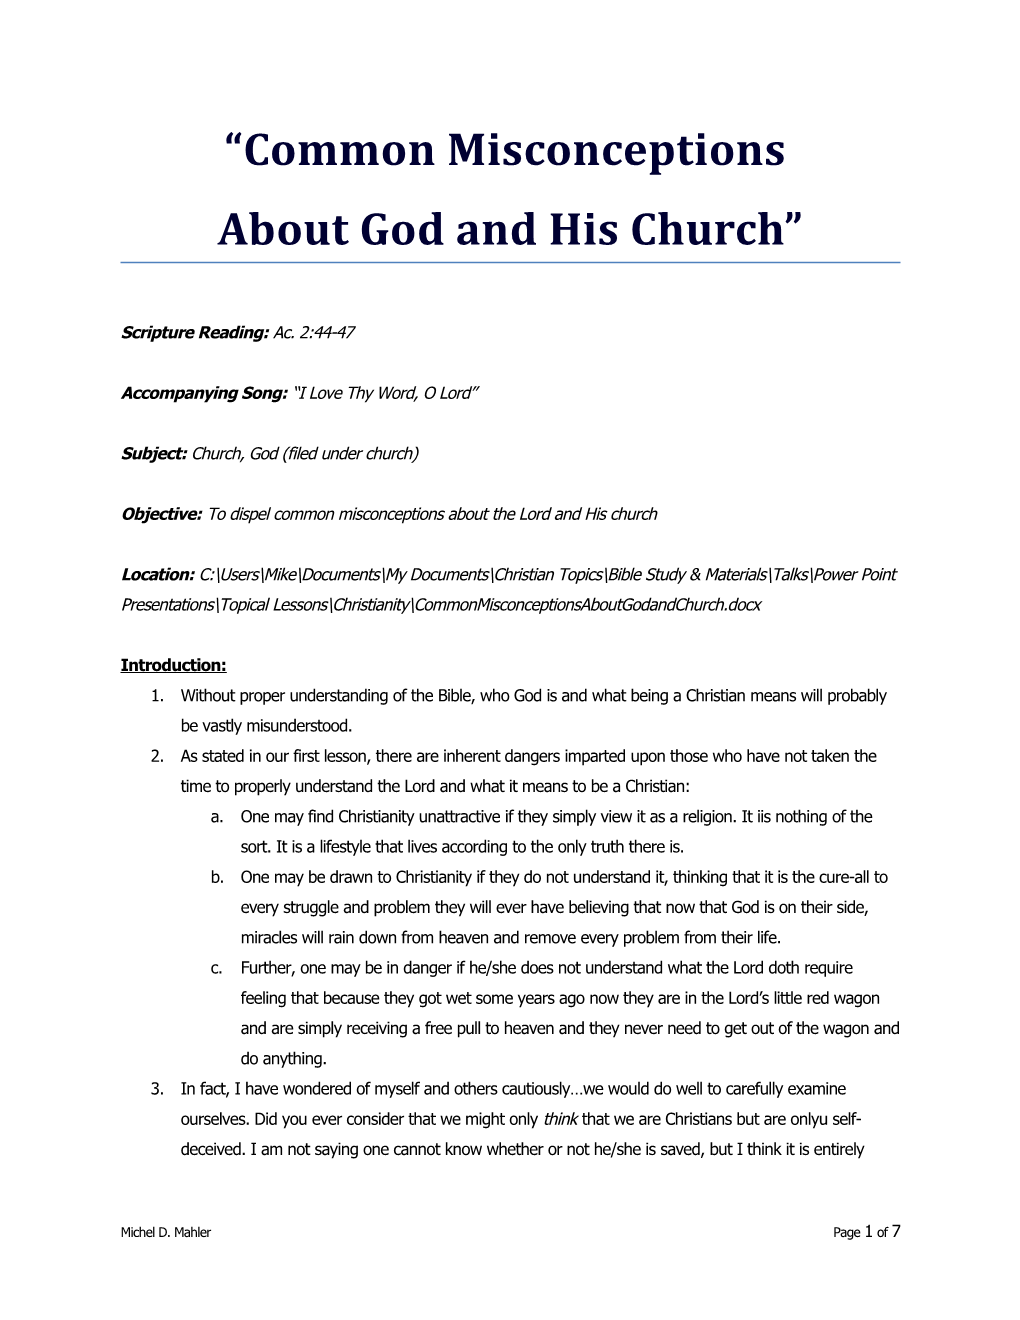 About God and His Church